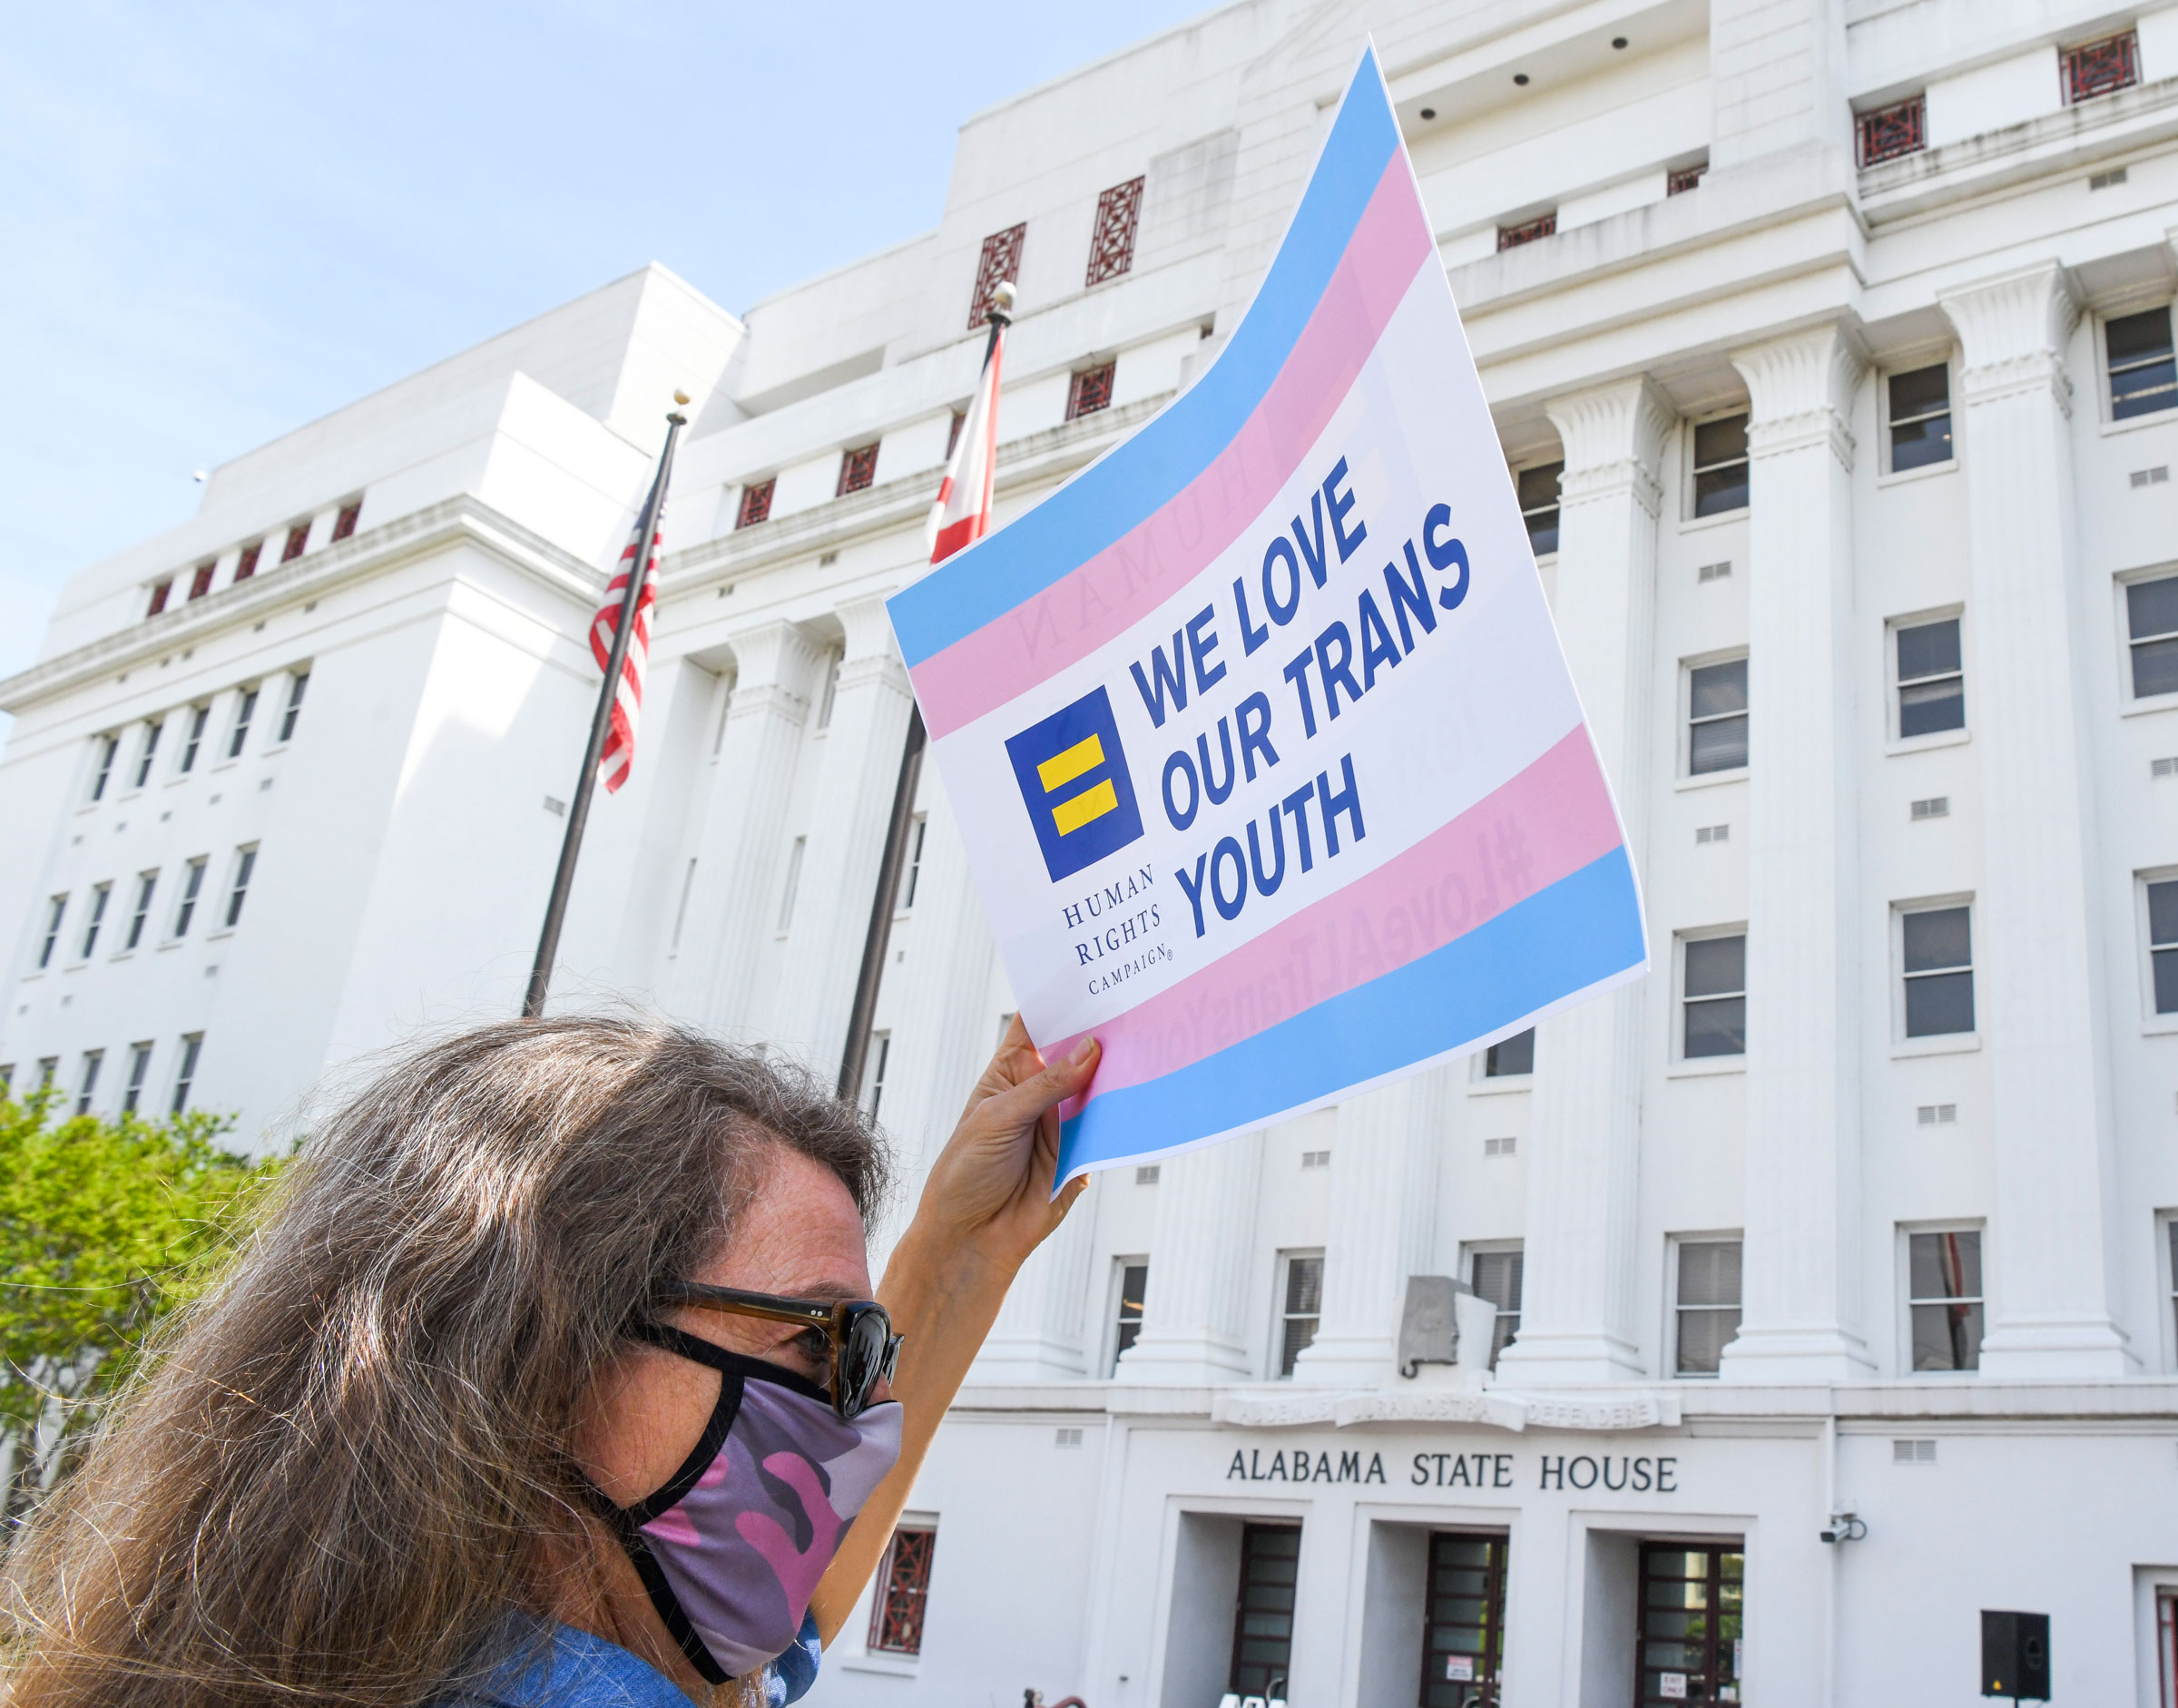 Jodi Womack holds a sign that reads "We Love Our Trans Youth" during a rally at the Alabama State House to draw attention to anti-transgender legislation introduced in Alabama on March 30, 2021 in Montgomery, Alabama. (Julie Bennett—Getty Images)